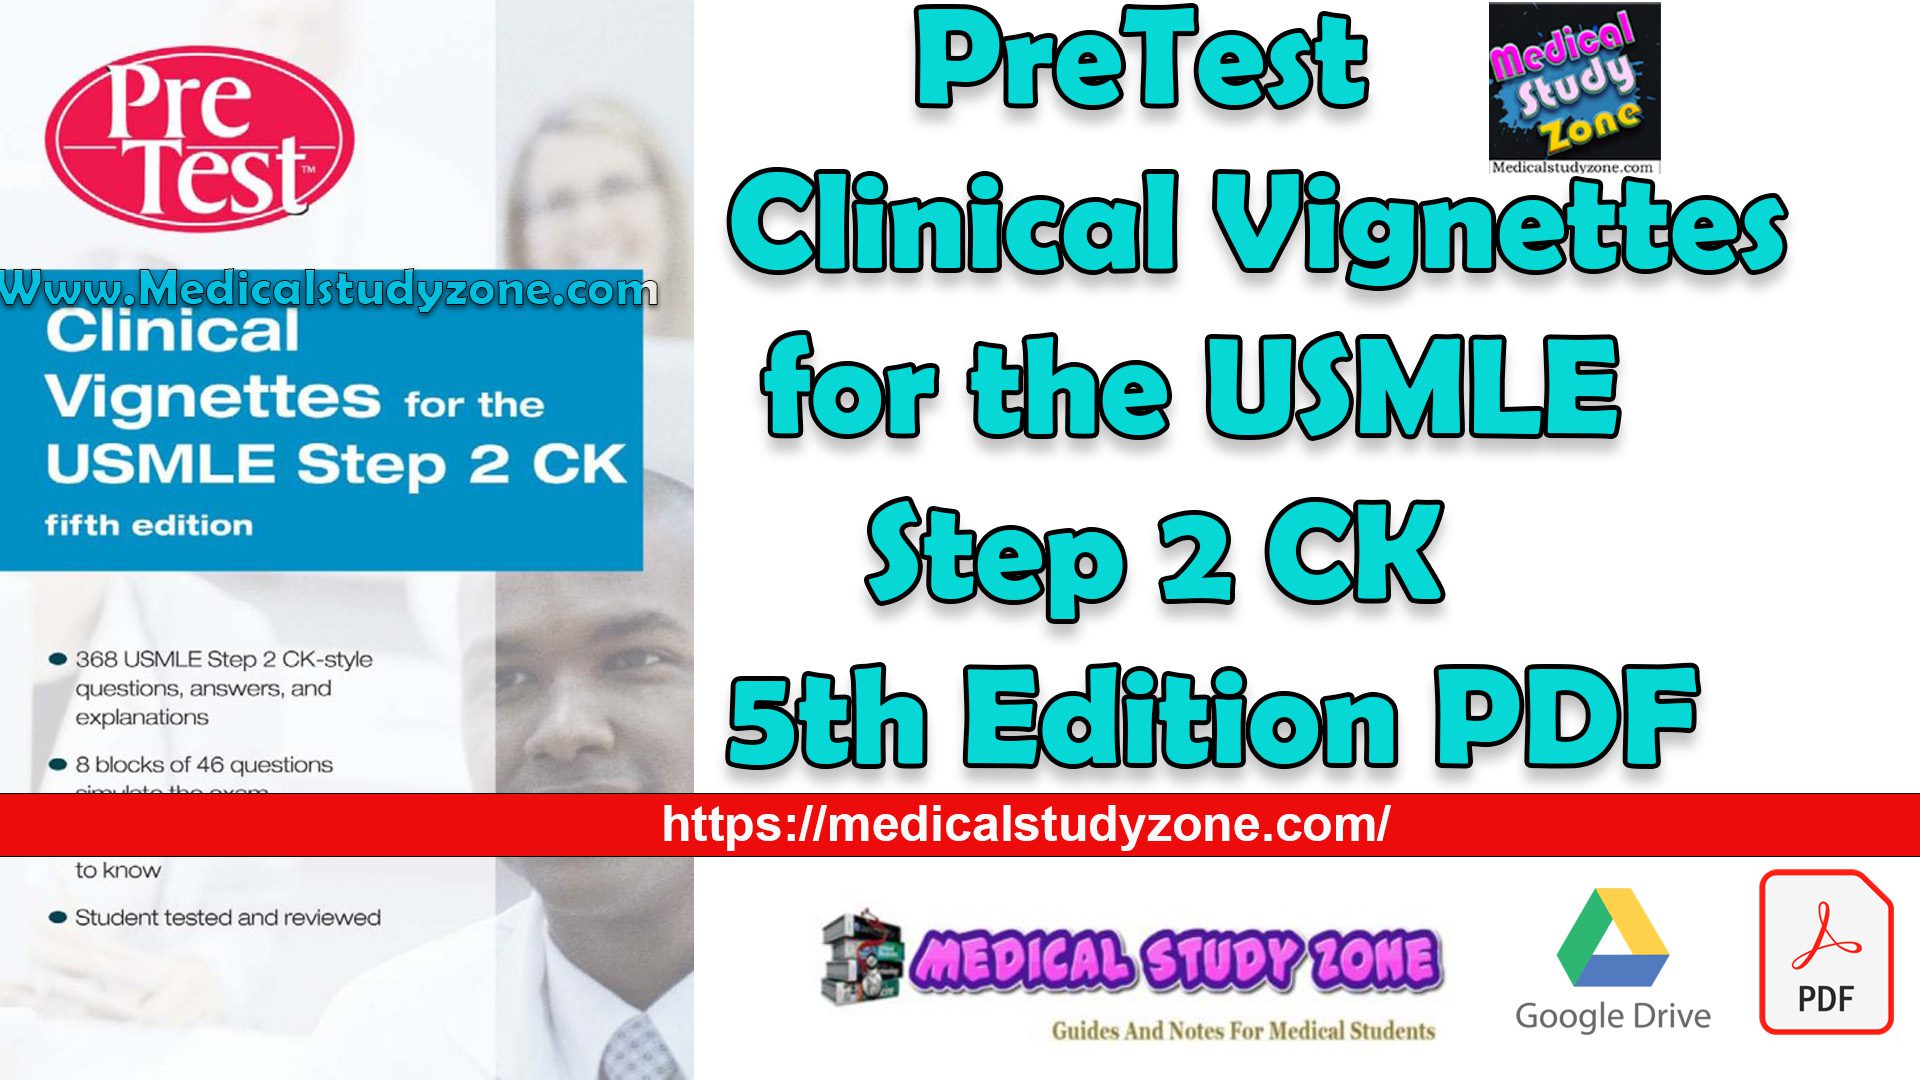 PreTest Clinical Vignettes for the USMLE Step 2 CK 5th Edition PDF Free Download